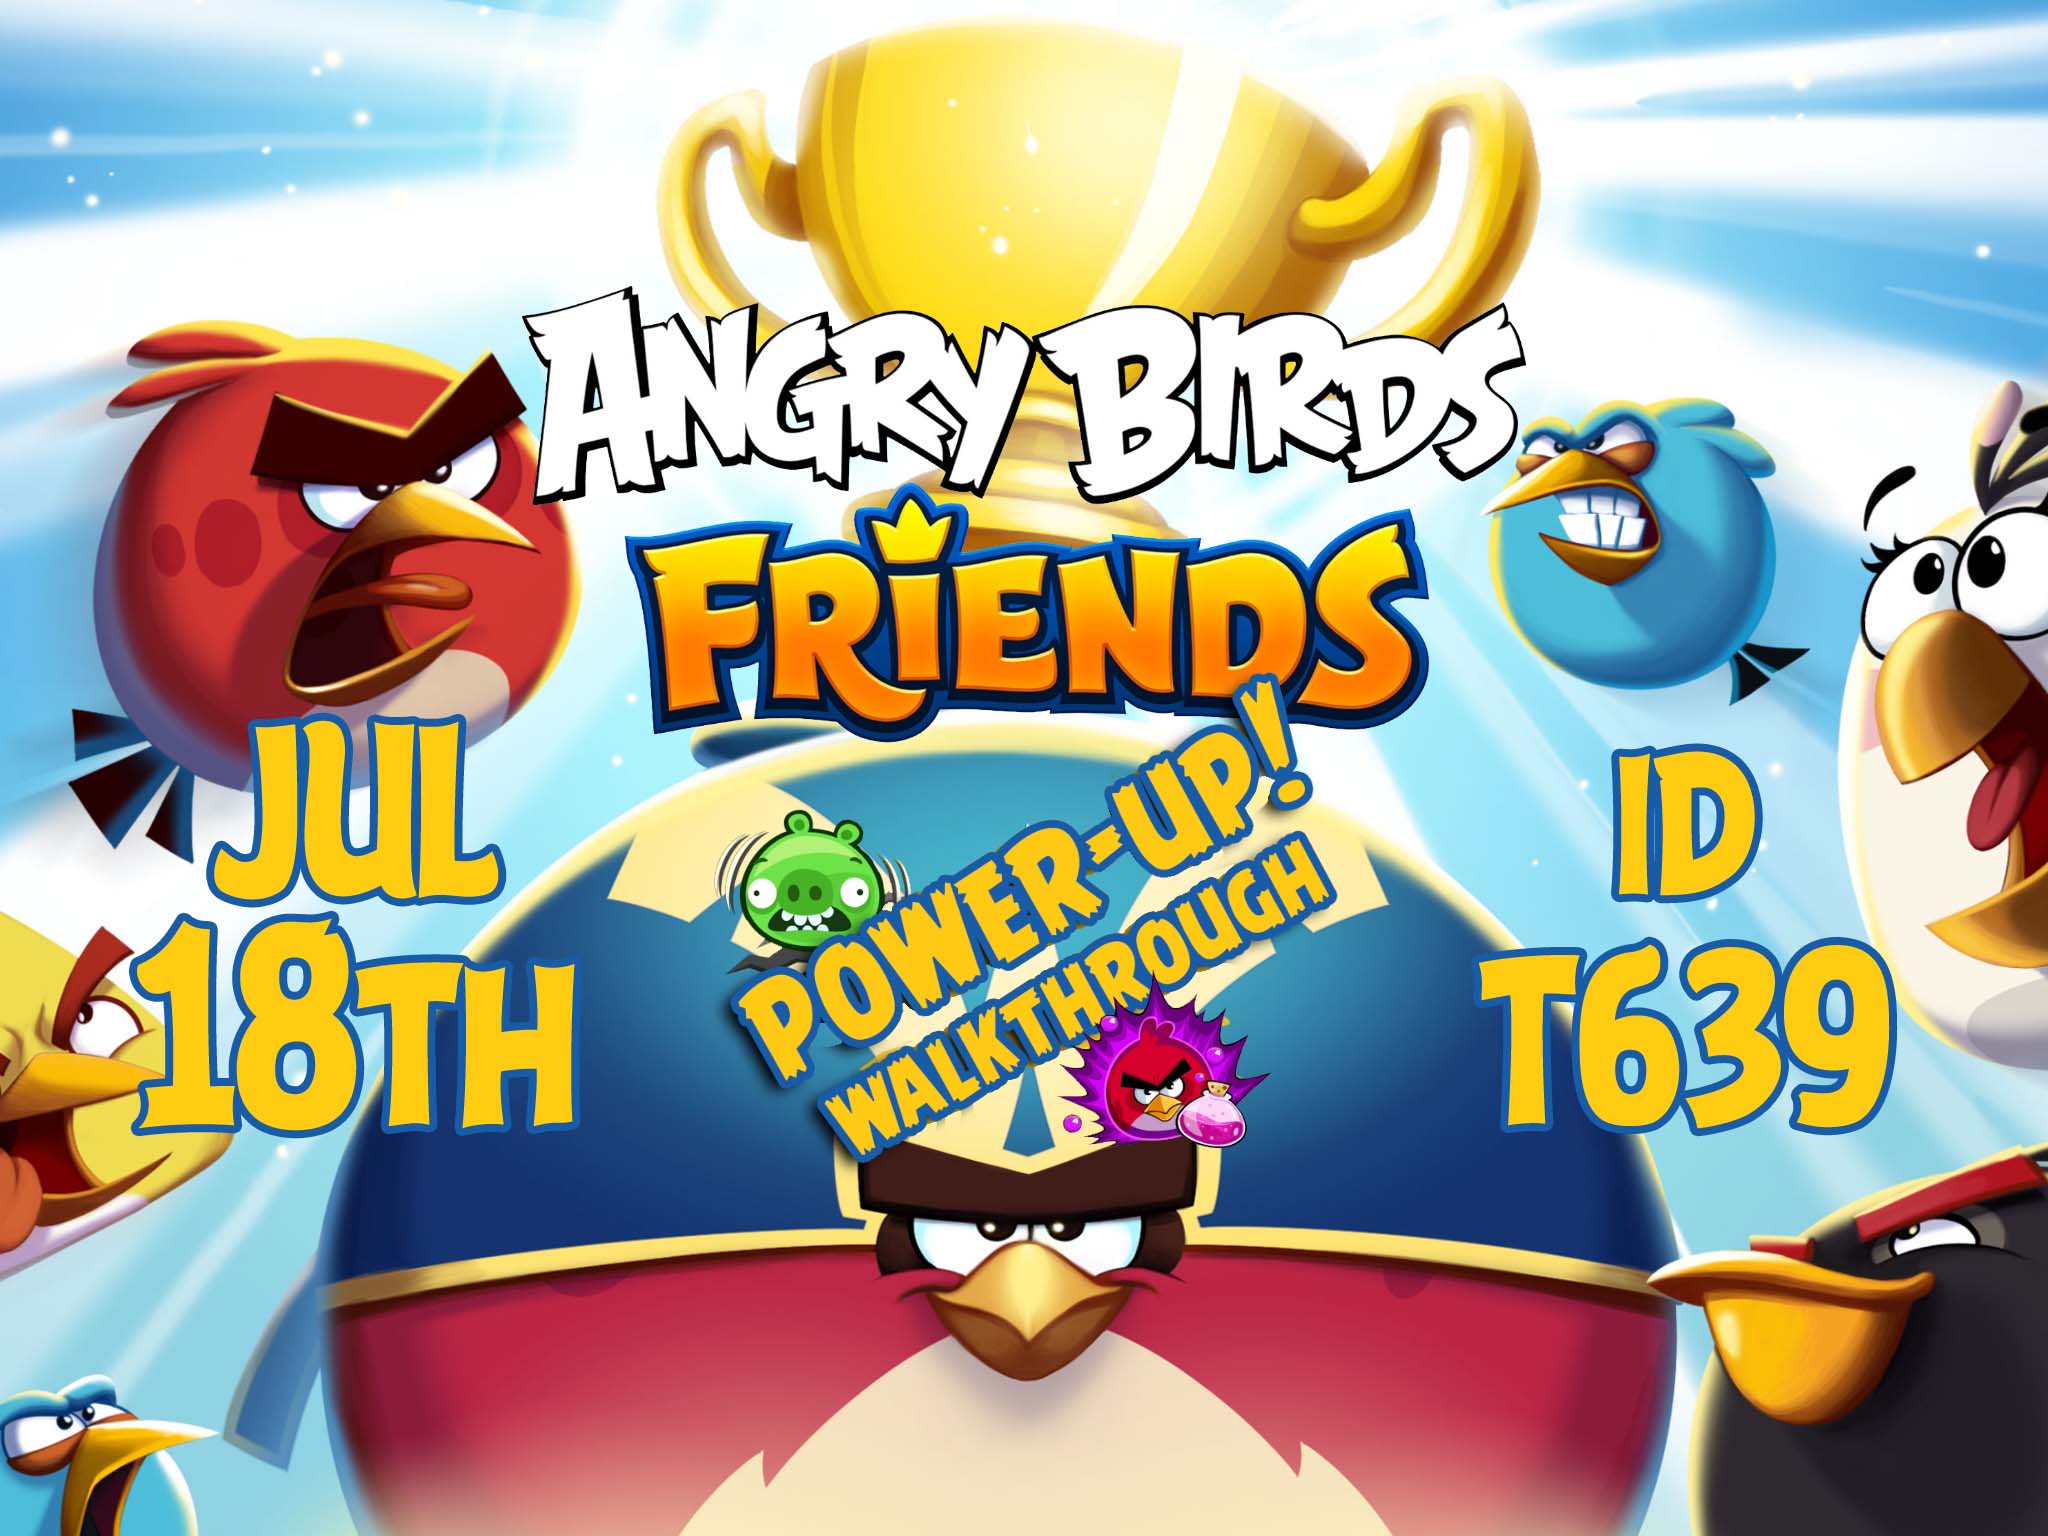 Angry-Birds-Friends-Tournament-T639-Feature-Image-PU